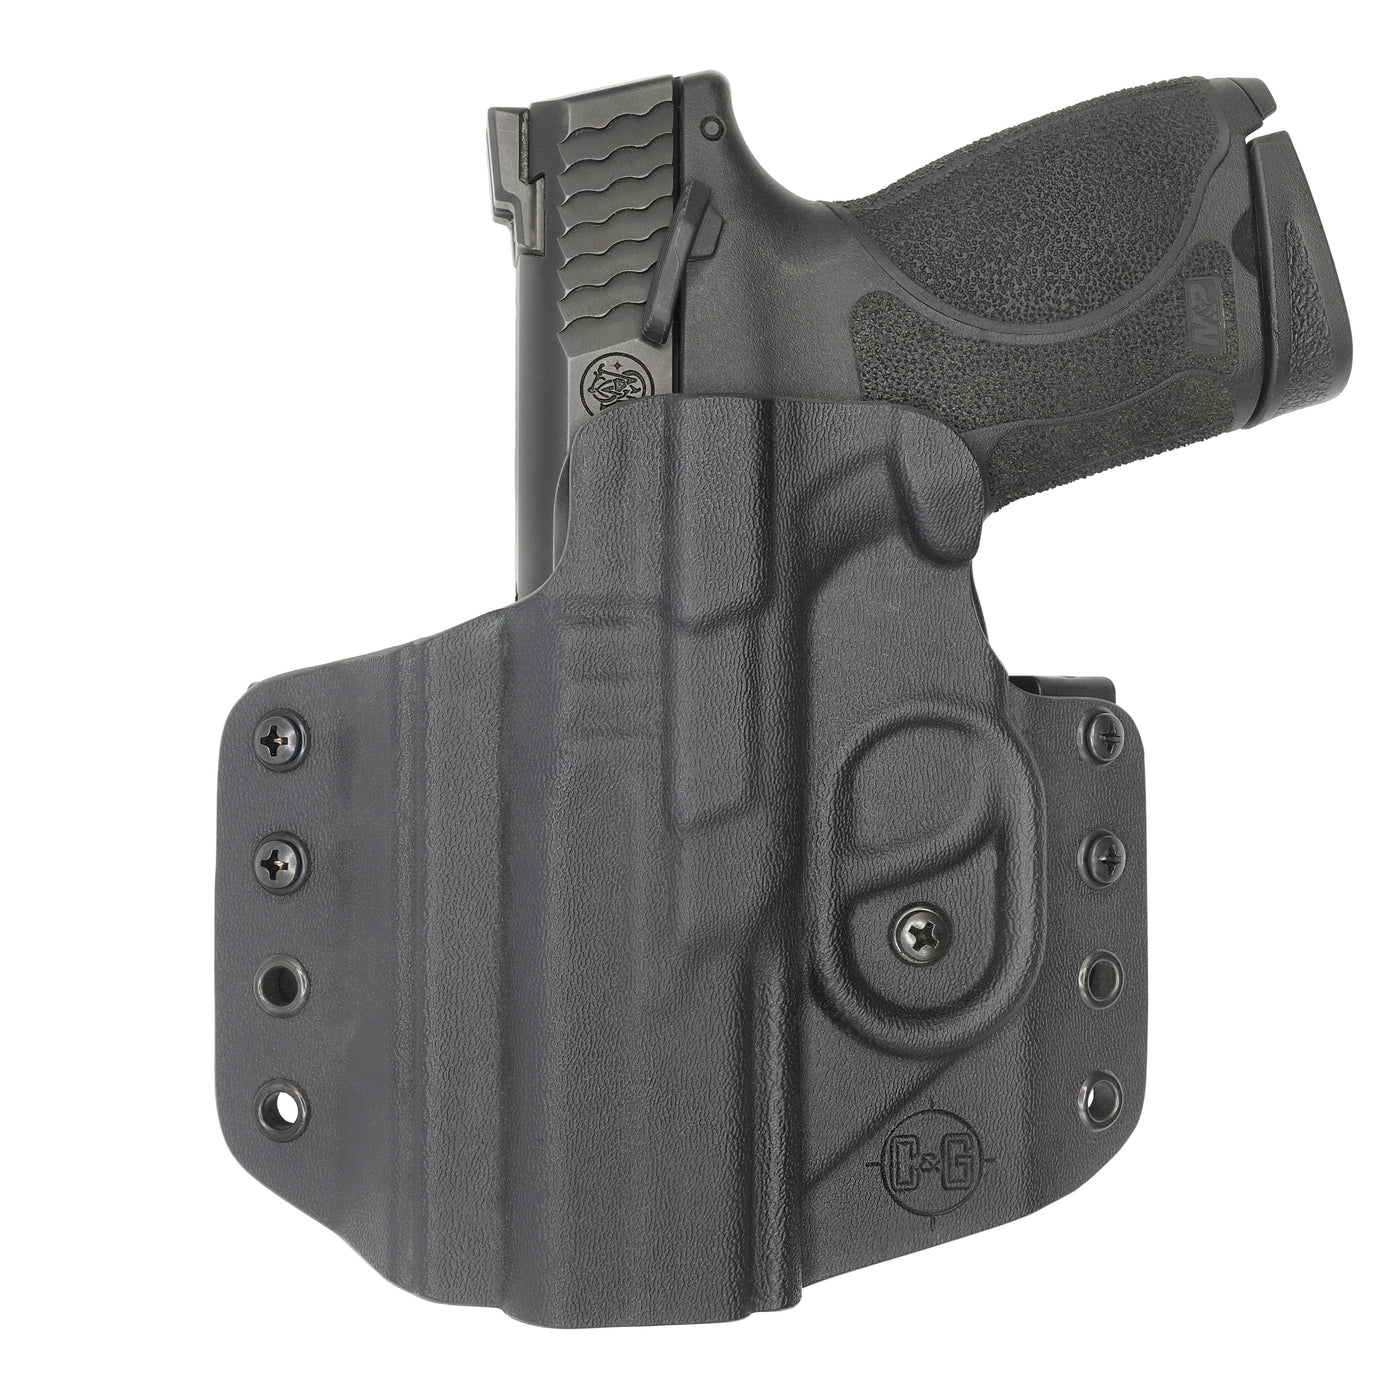 C&G Holsters quickship OWB Covert M&P 10/45 4" Left hand in holstered position